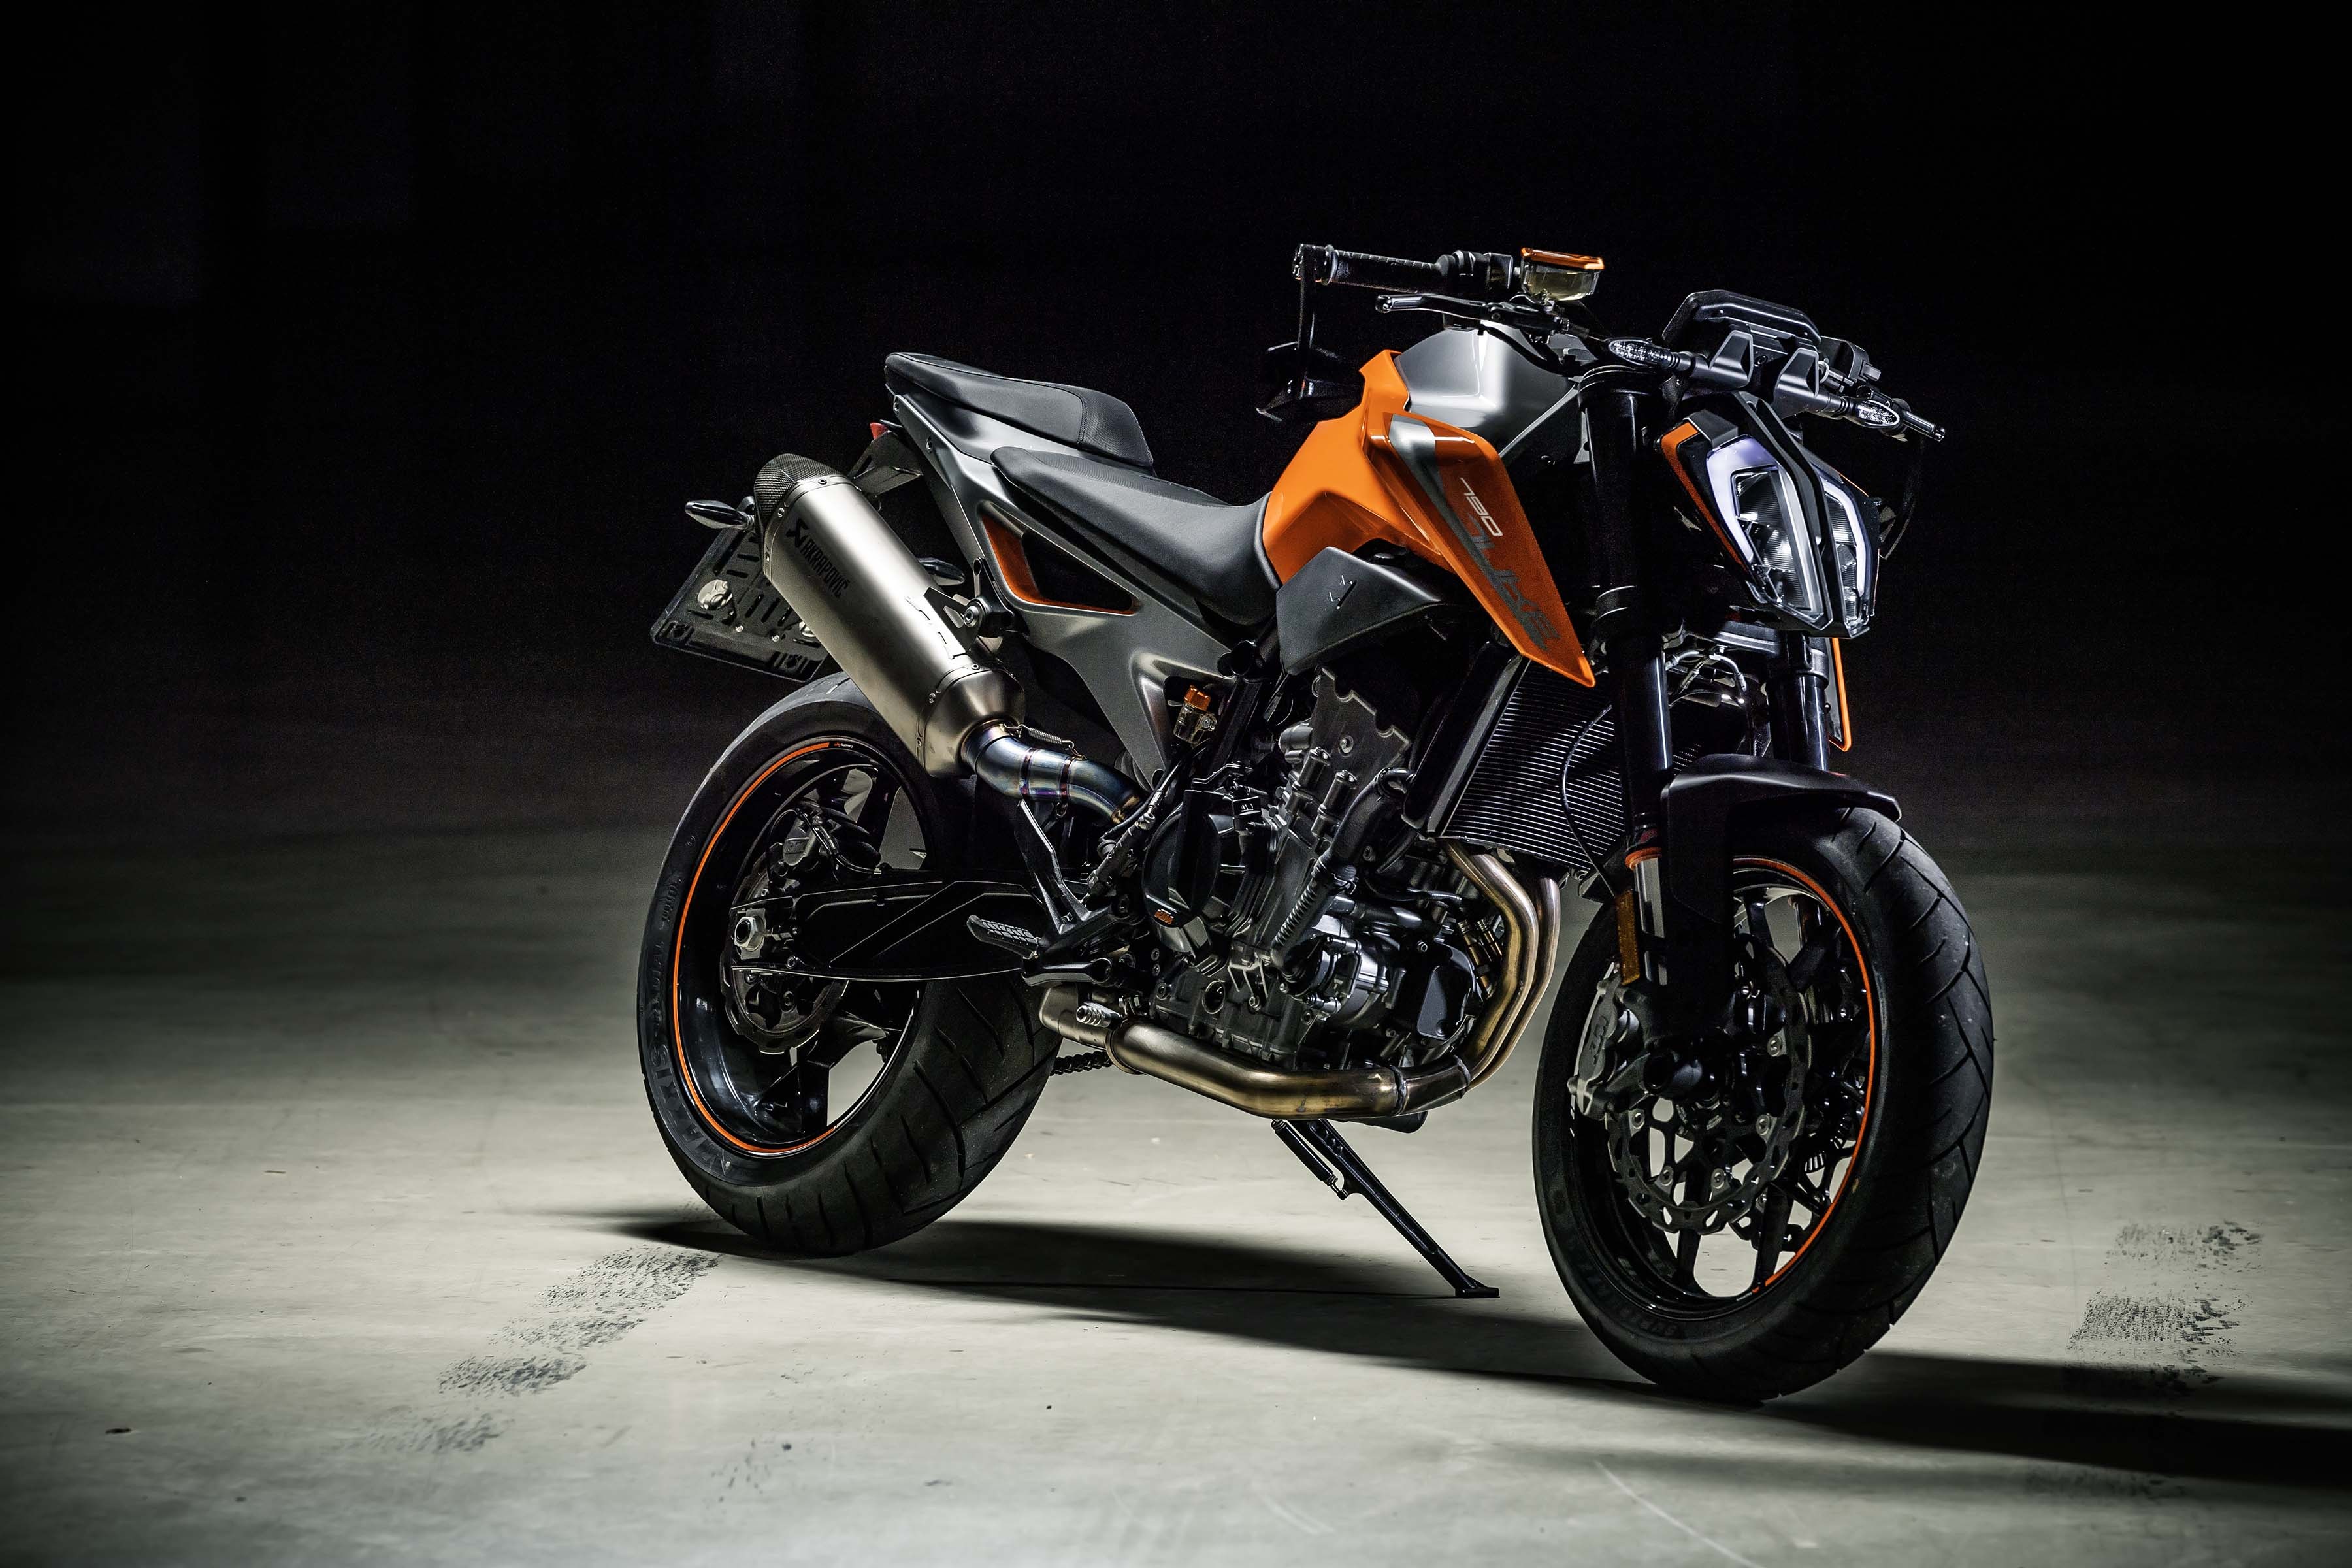 KTM 790 DUKE LAUNCHES IN INDIA